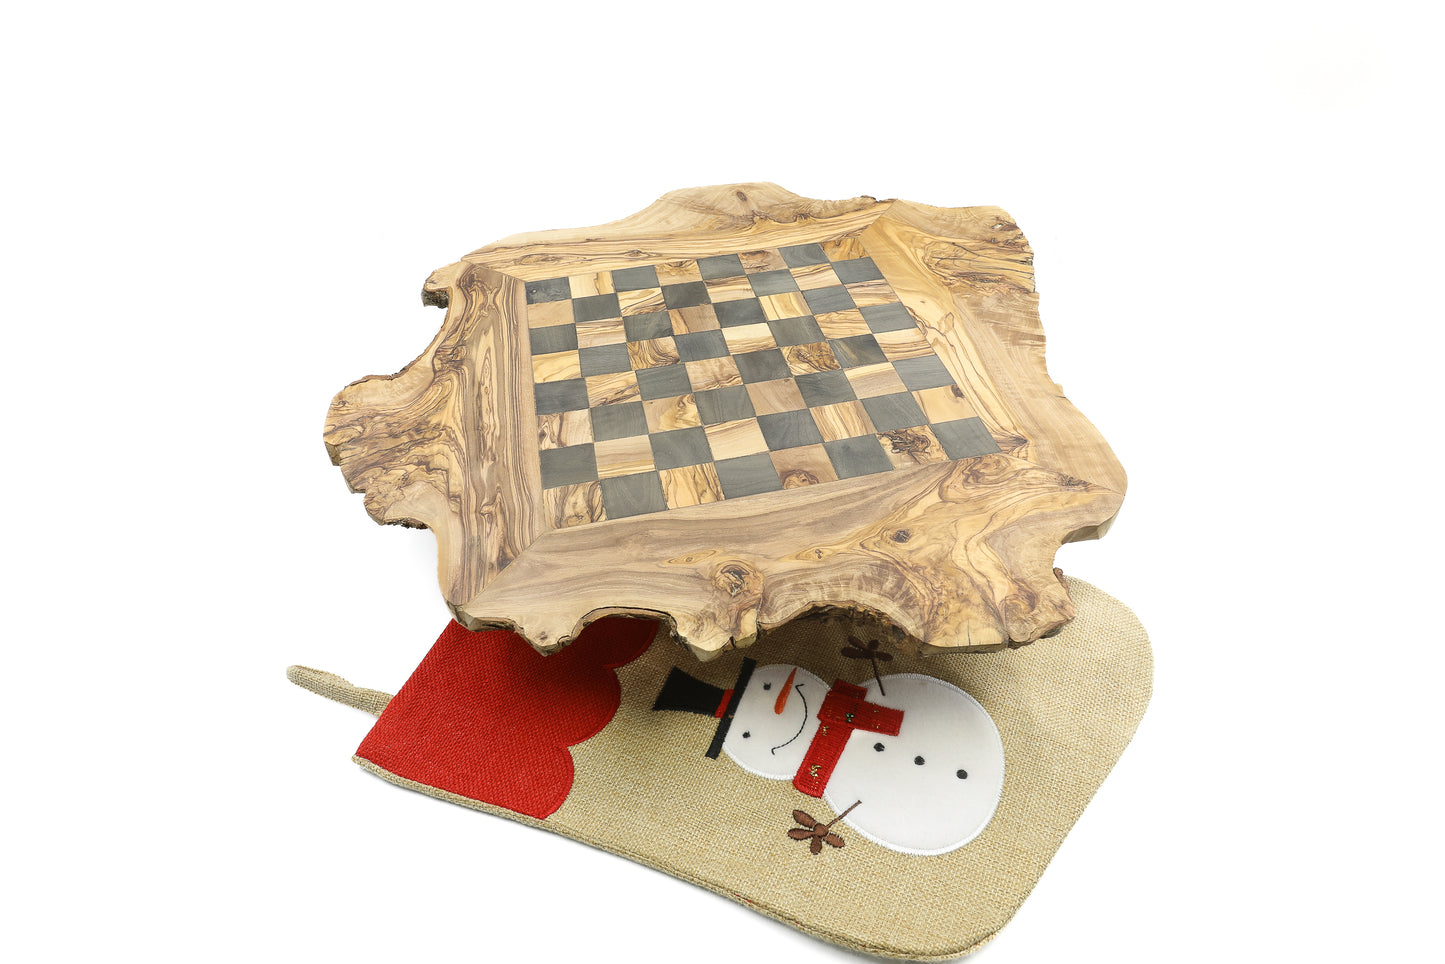 Sophisticated Chess Board Set in Olive Wood with Coordinating Pieces